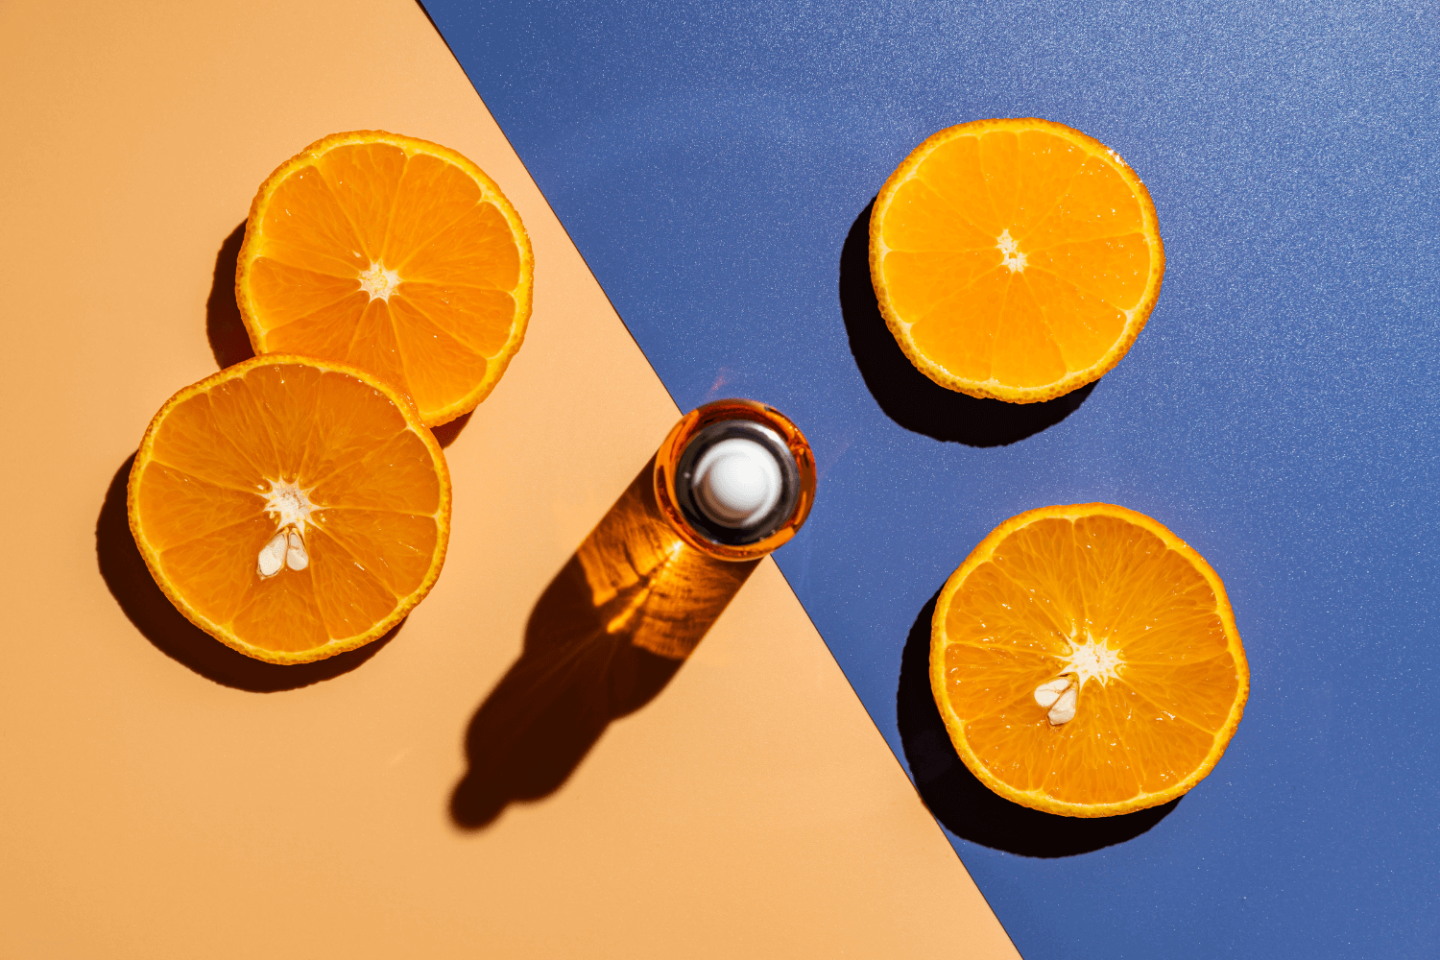 Vitamin C serum surrounded by sliced oranges